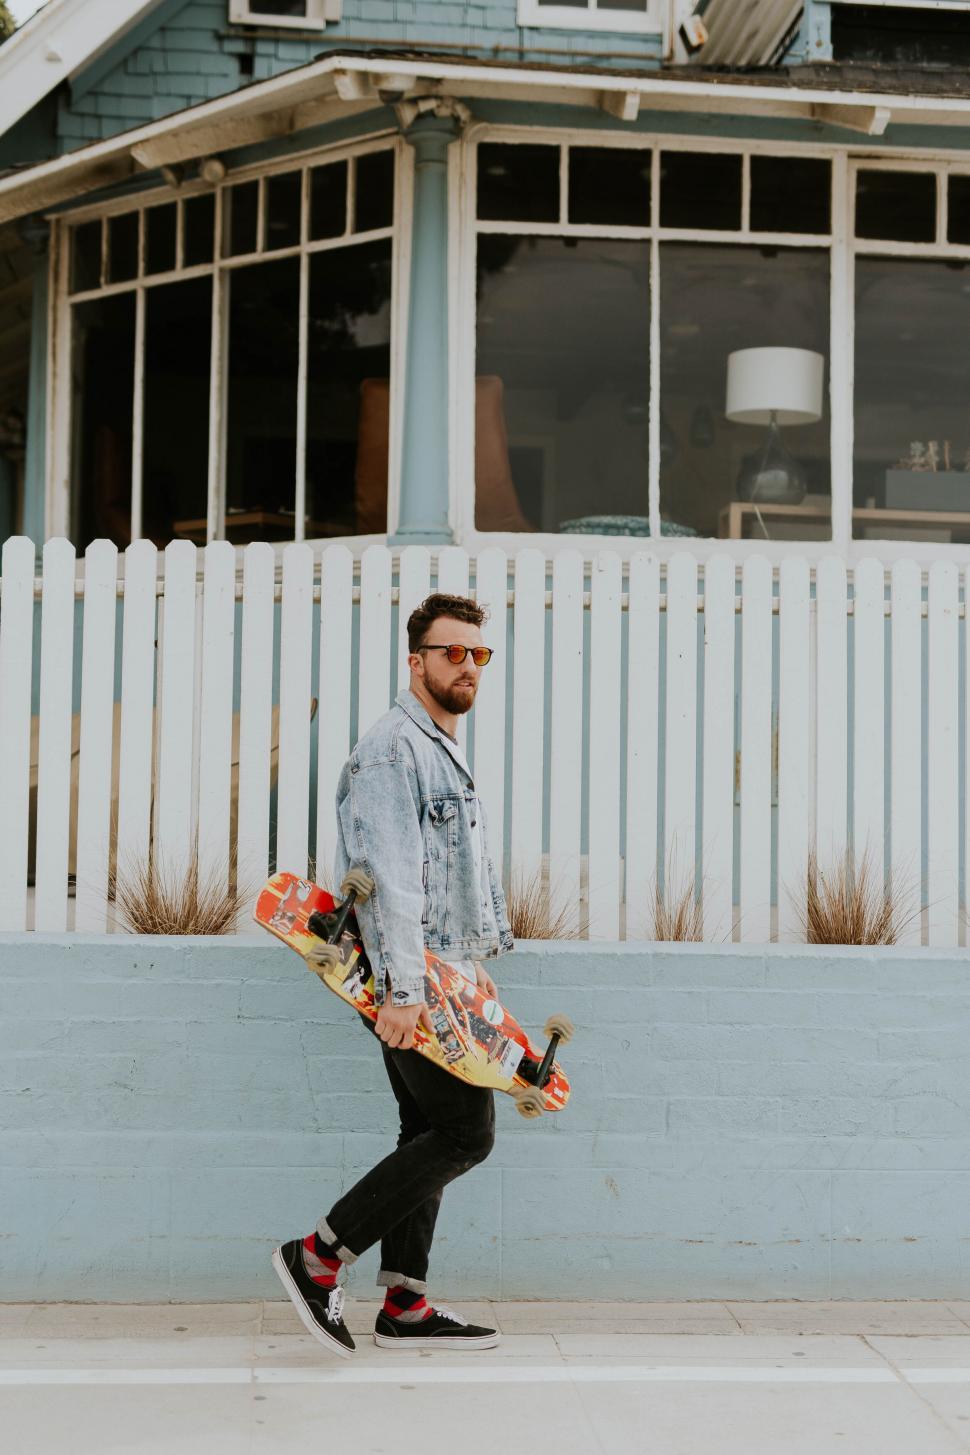 Free Image of Skater with denim jacket walking in front of house 